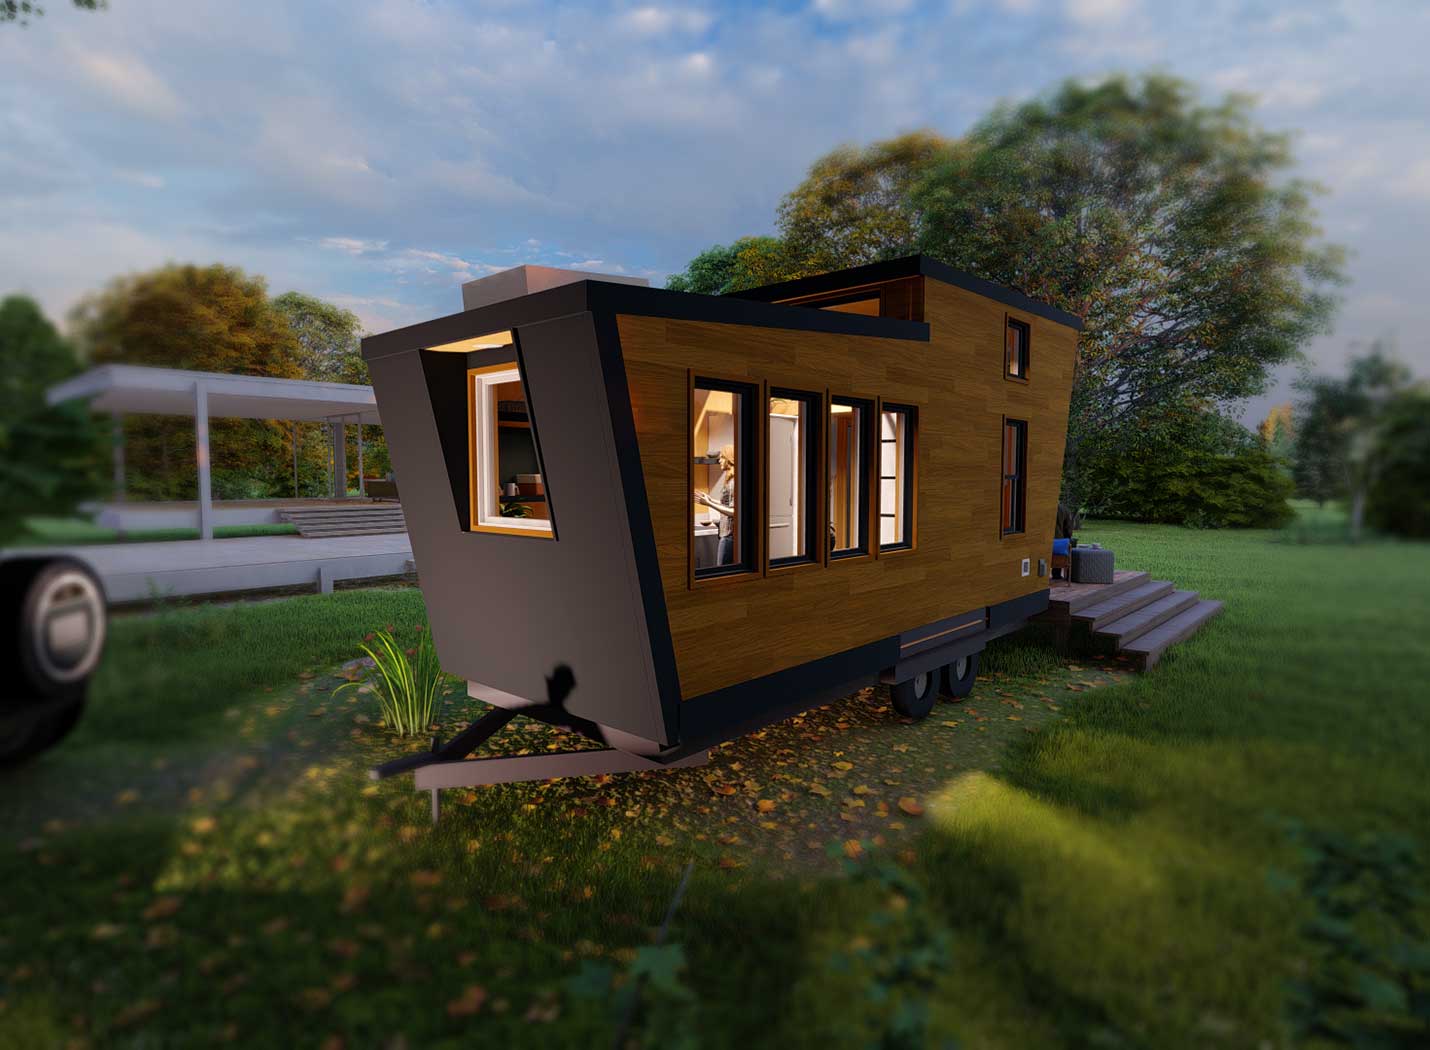 Heirloom-X tiny home exterior, part of the Signature Series of TIny Homes for sale by Tiny Heirloom